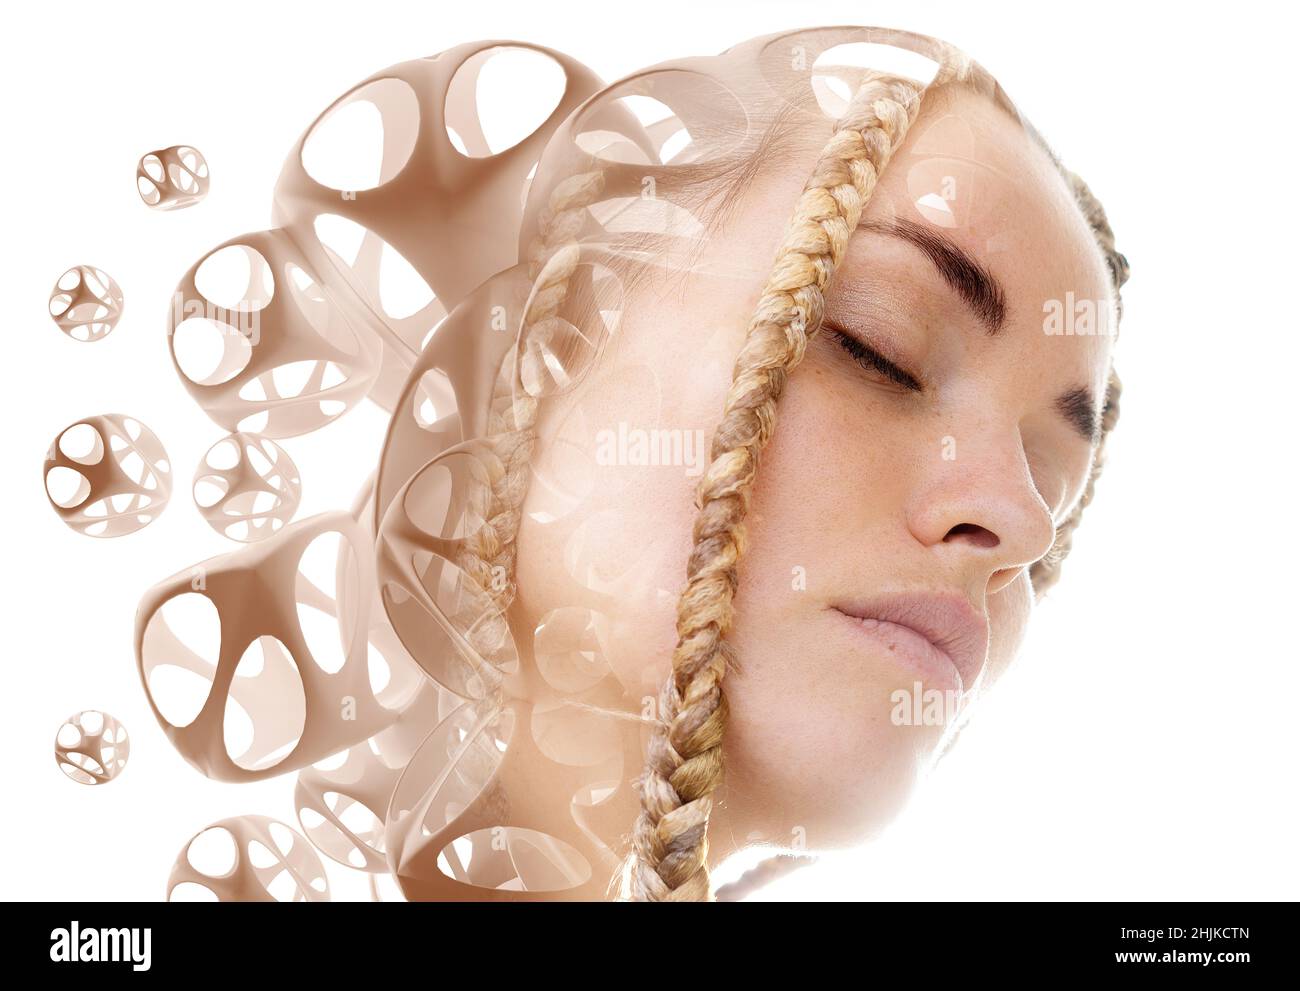 A portrait of a woman combined with multiple holey 3D spheres. Stock Photo